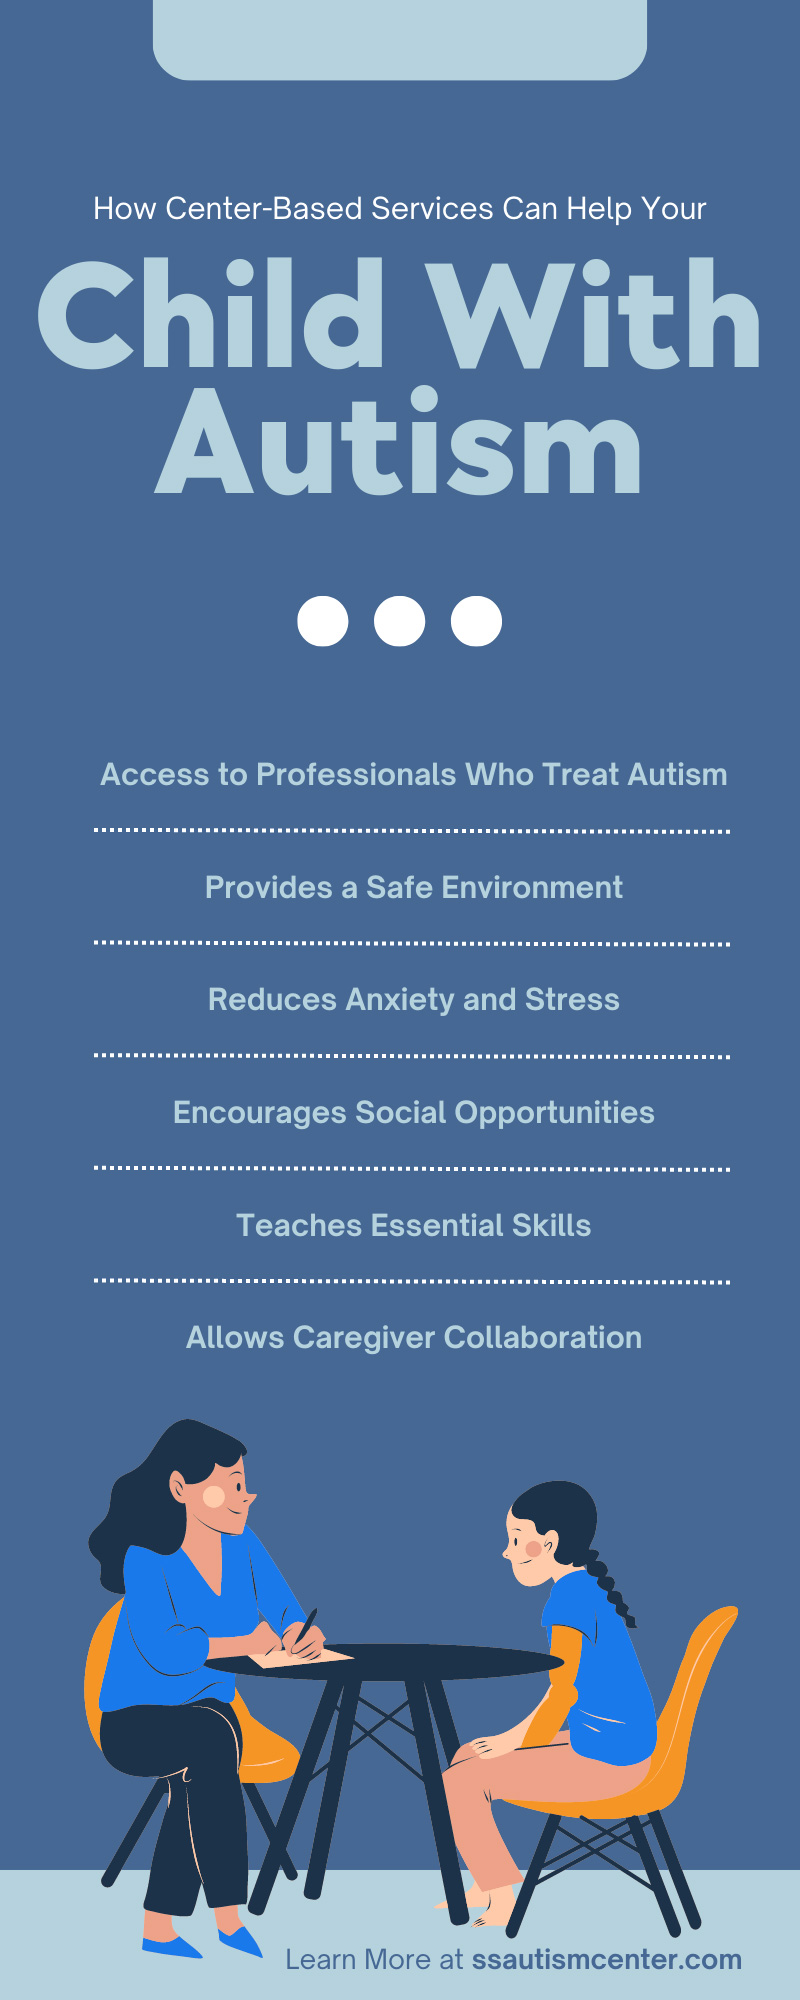 How Center-Based Services Can Help Your Child With Autism